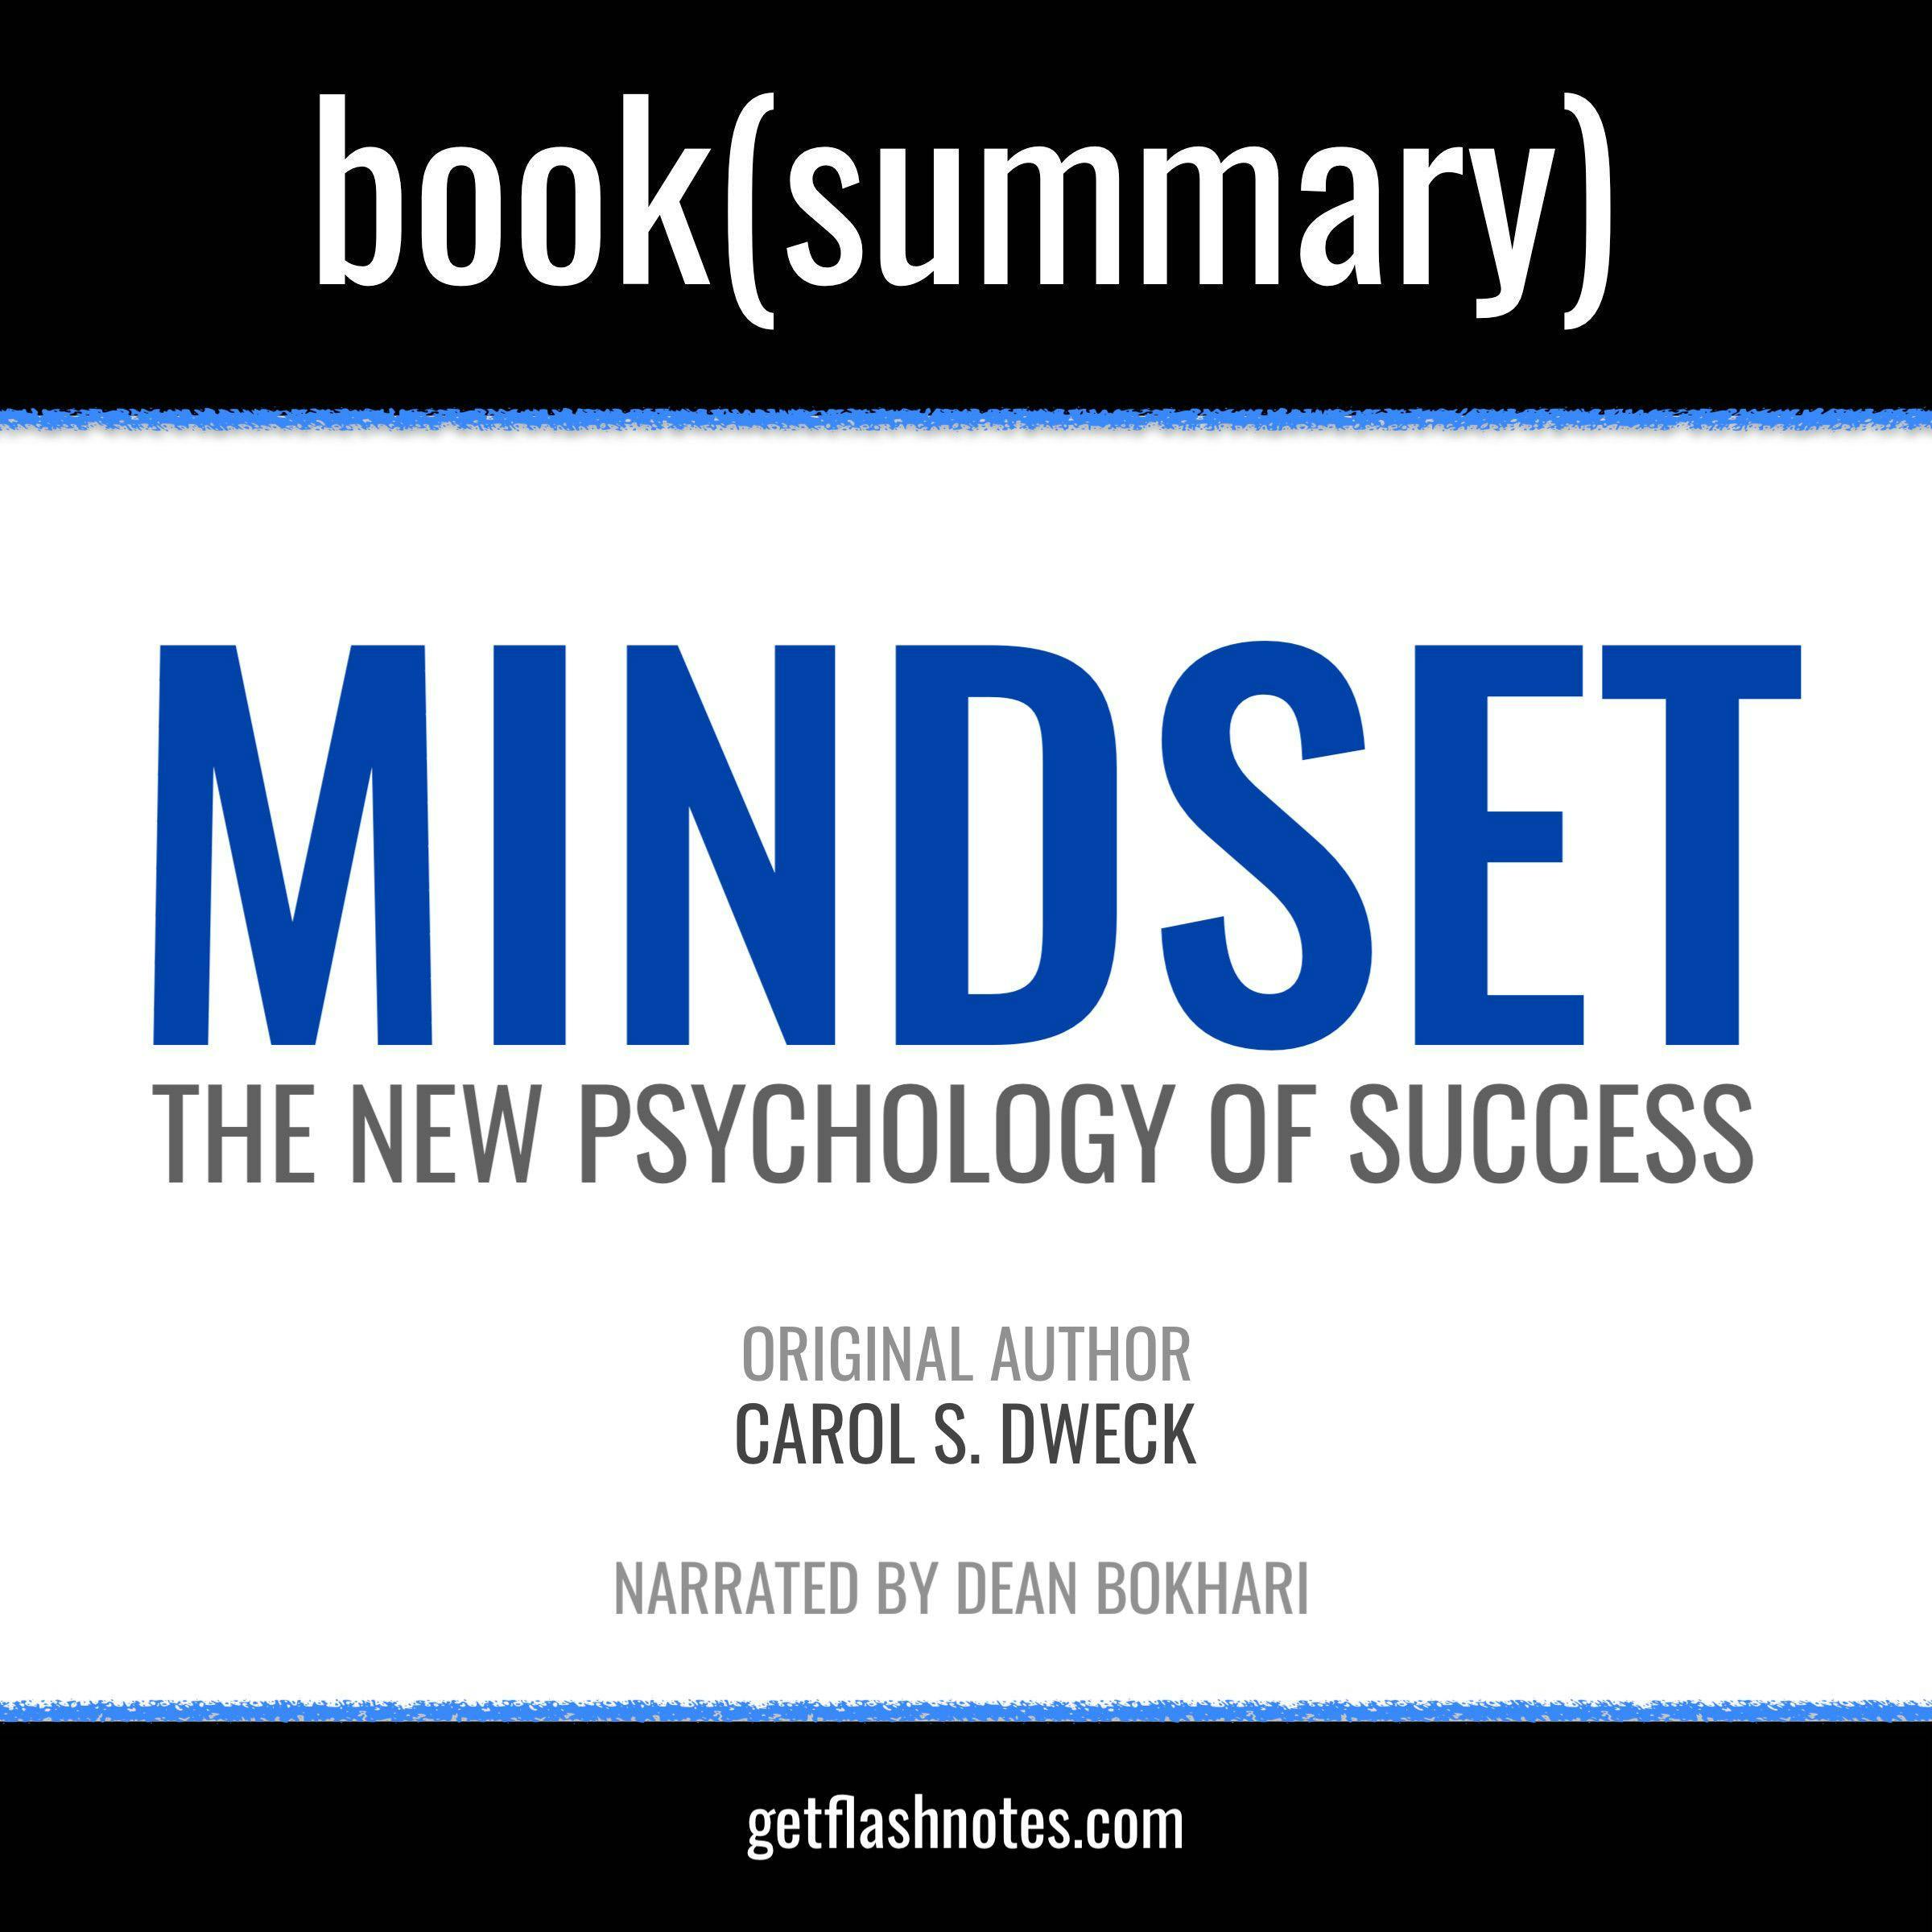 Mindset by Carol S. Dweck - Book Summary: The New Psychology of Success - undefined